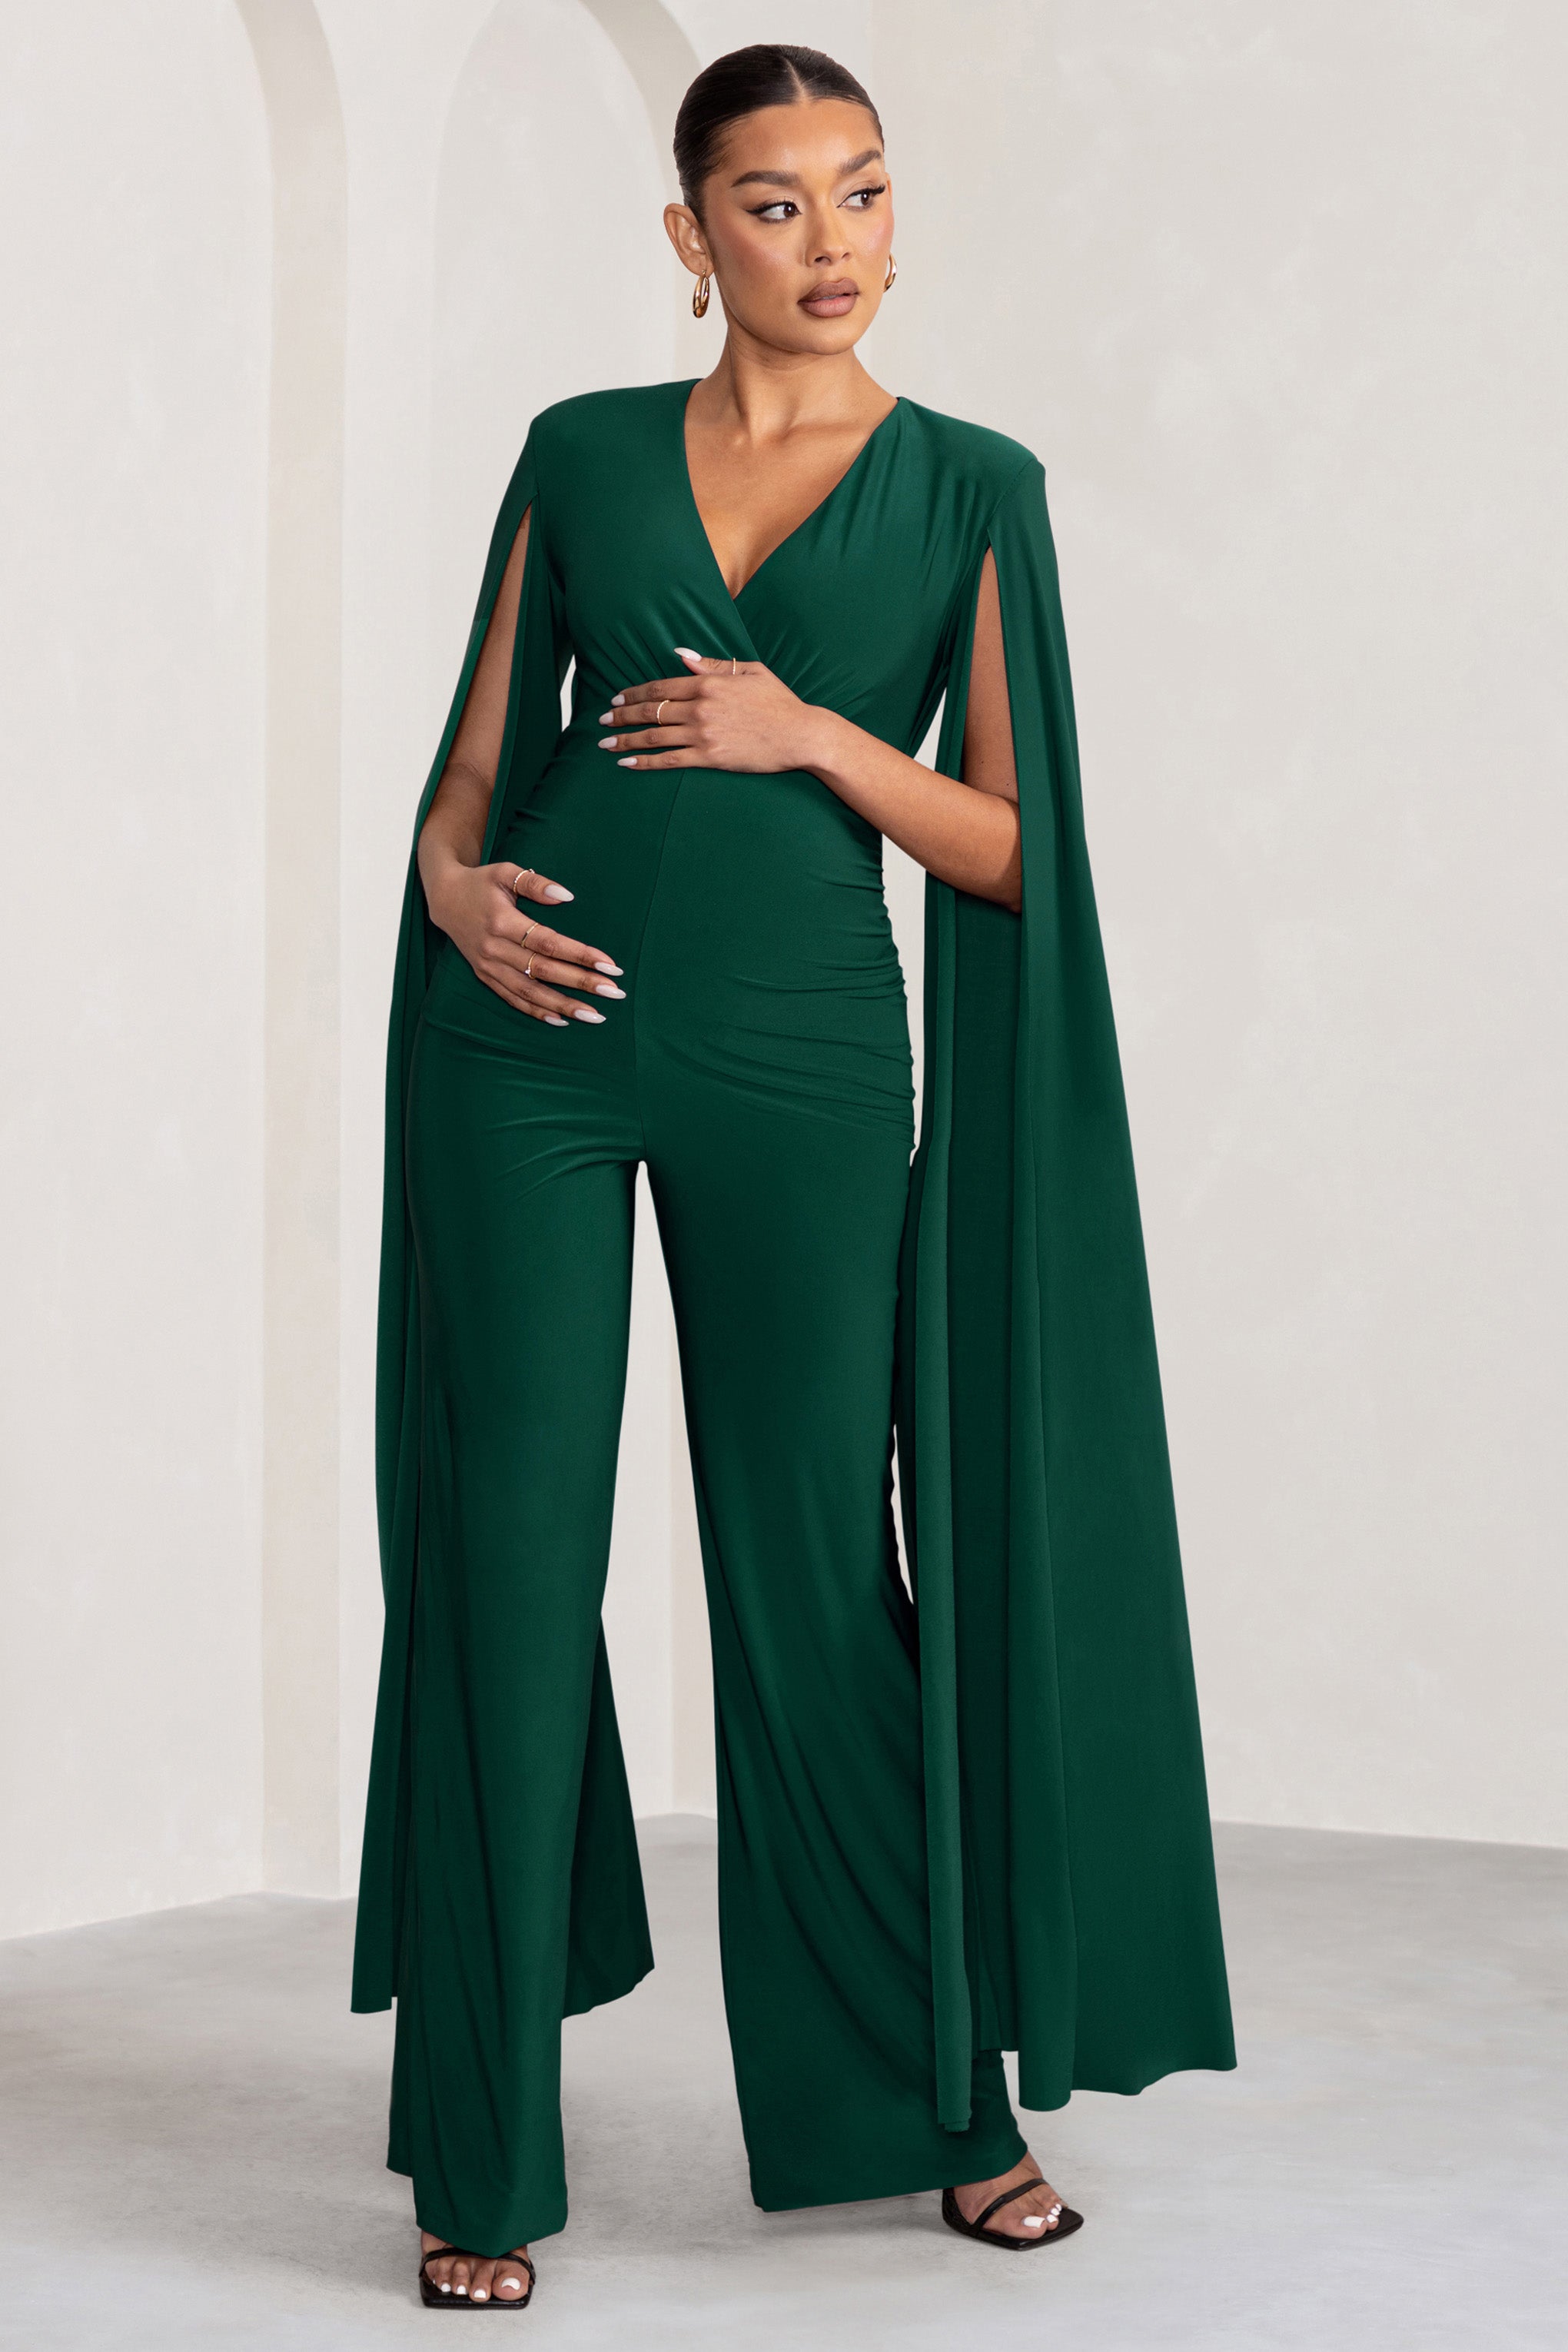 Triumph | Bottle Green Plunge Neck Maternity Jumpsuit with Cape Sleeves